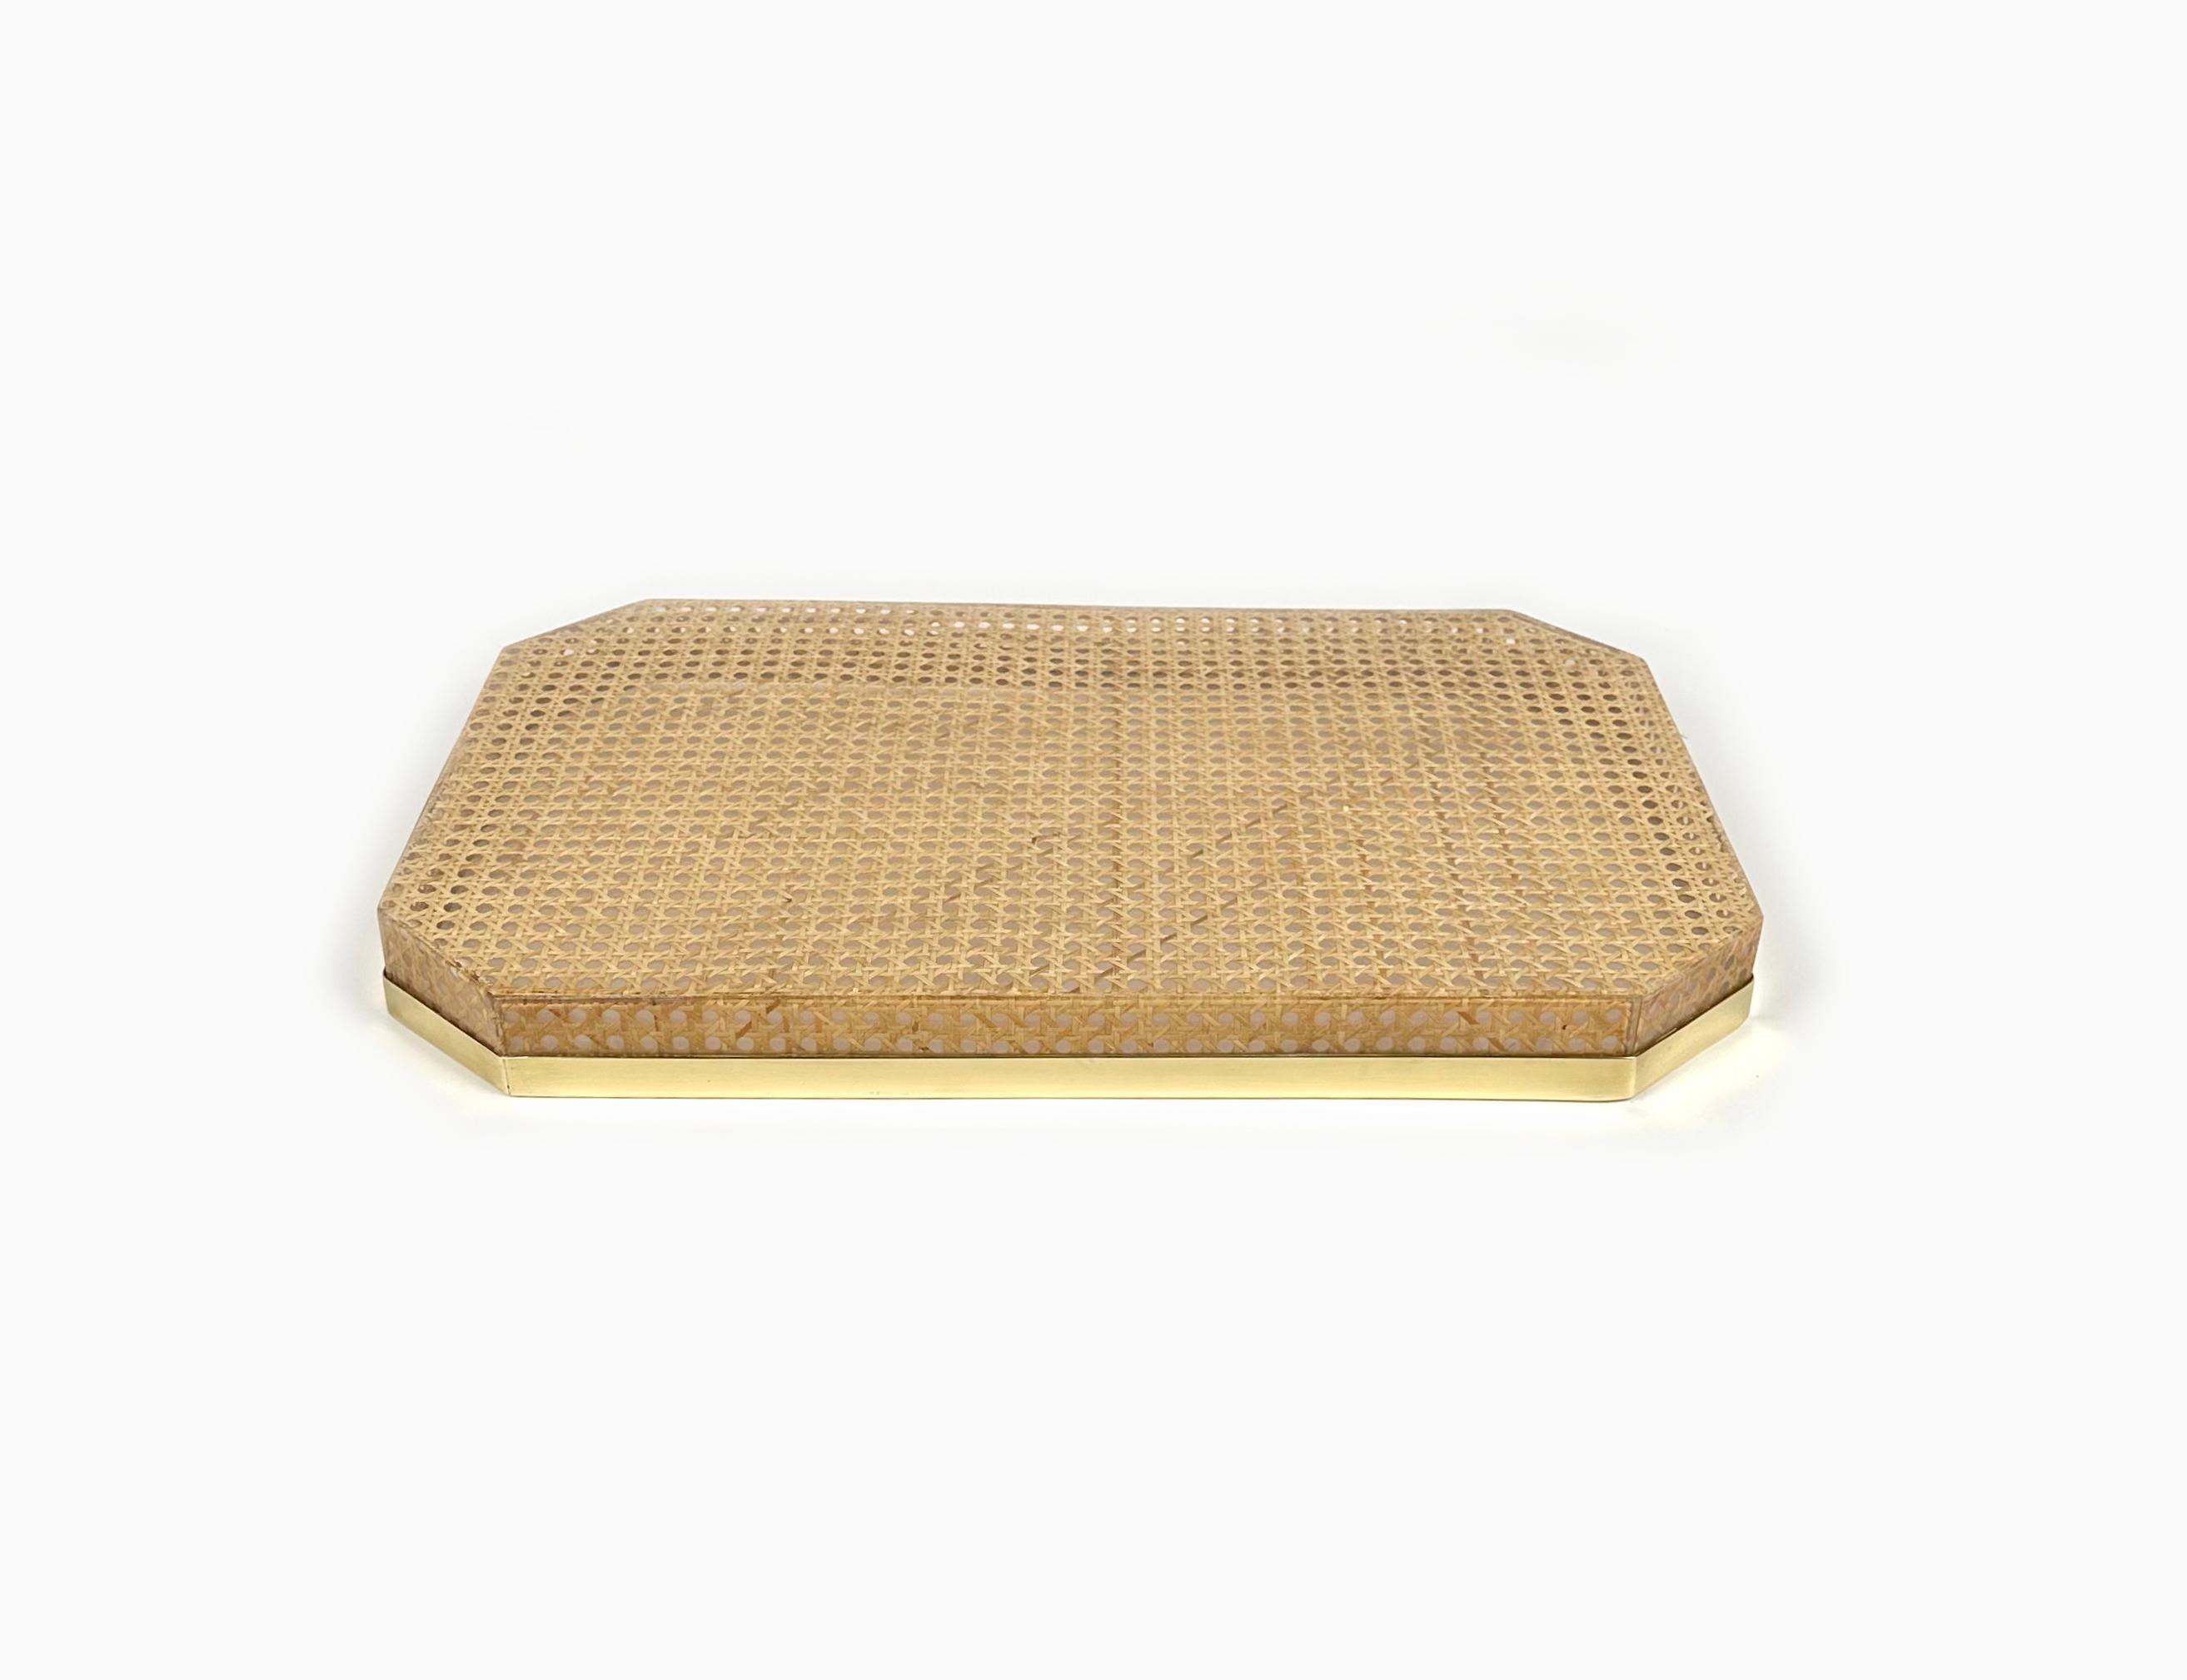 Serving Tray in Lucite, Rattan and Brass Christian Dior Style, Italy, 1970s 1